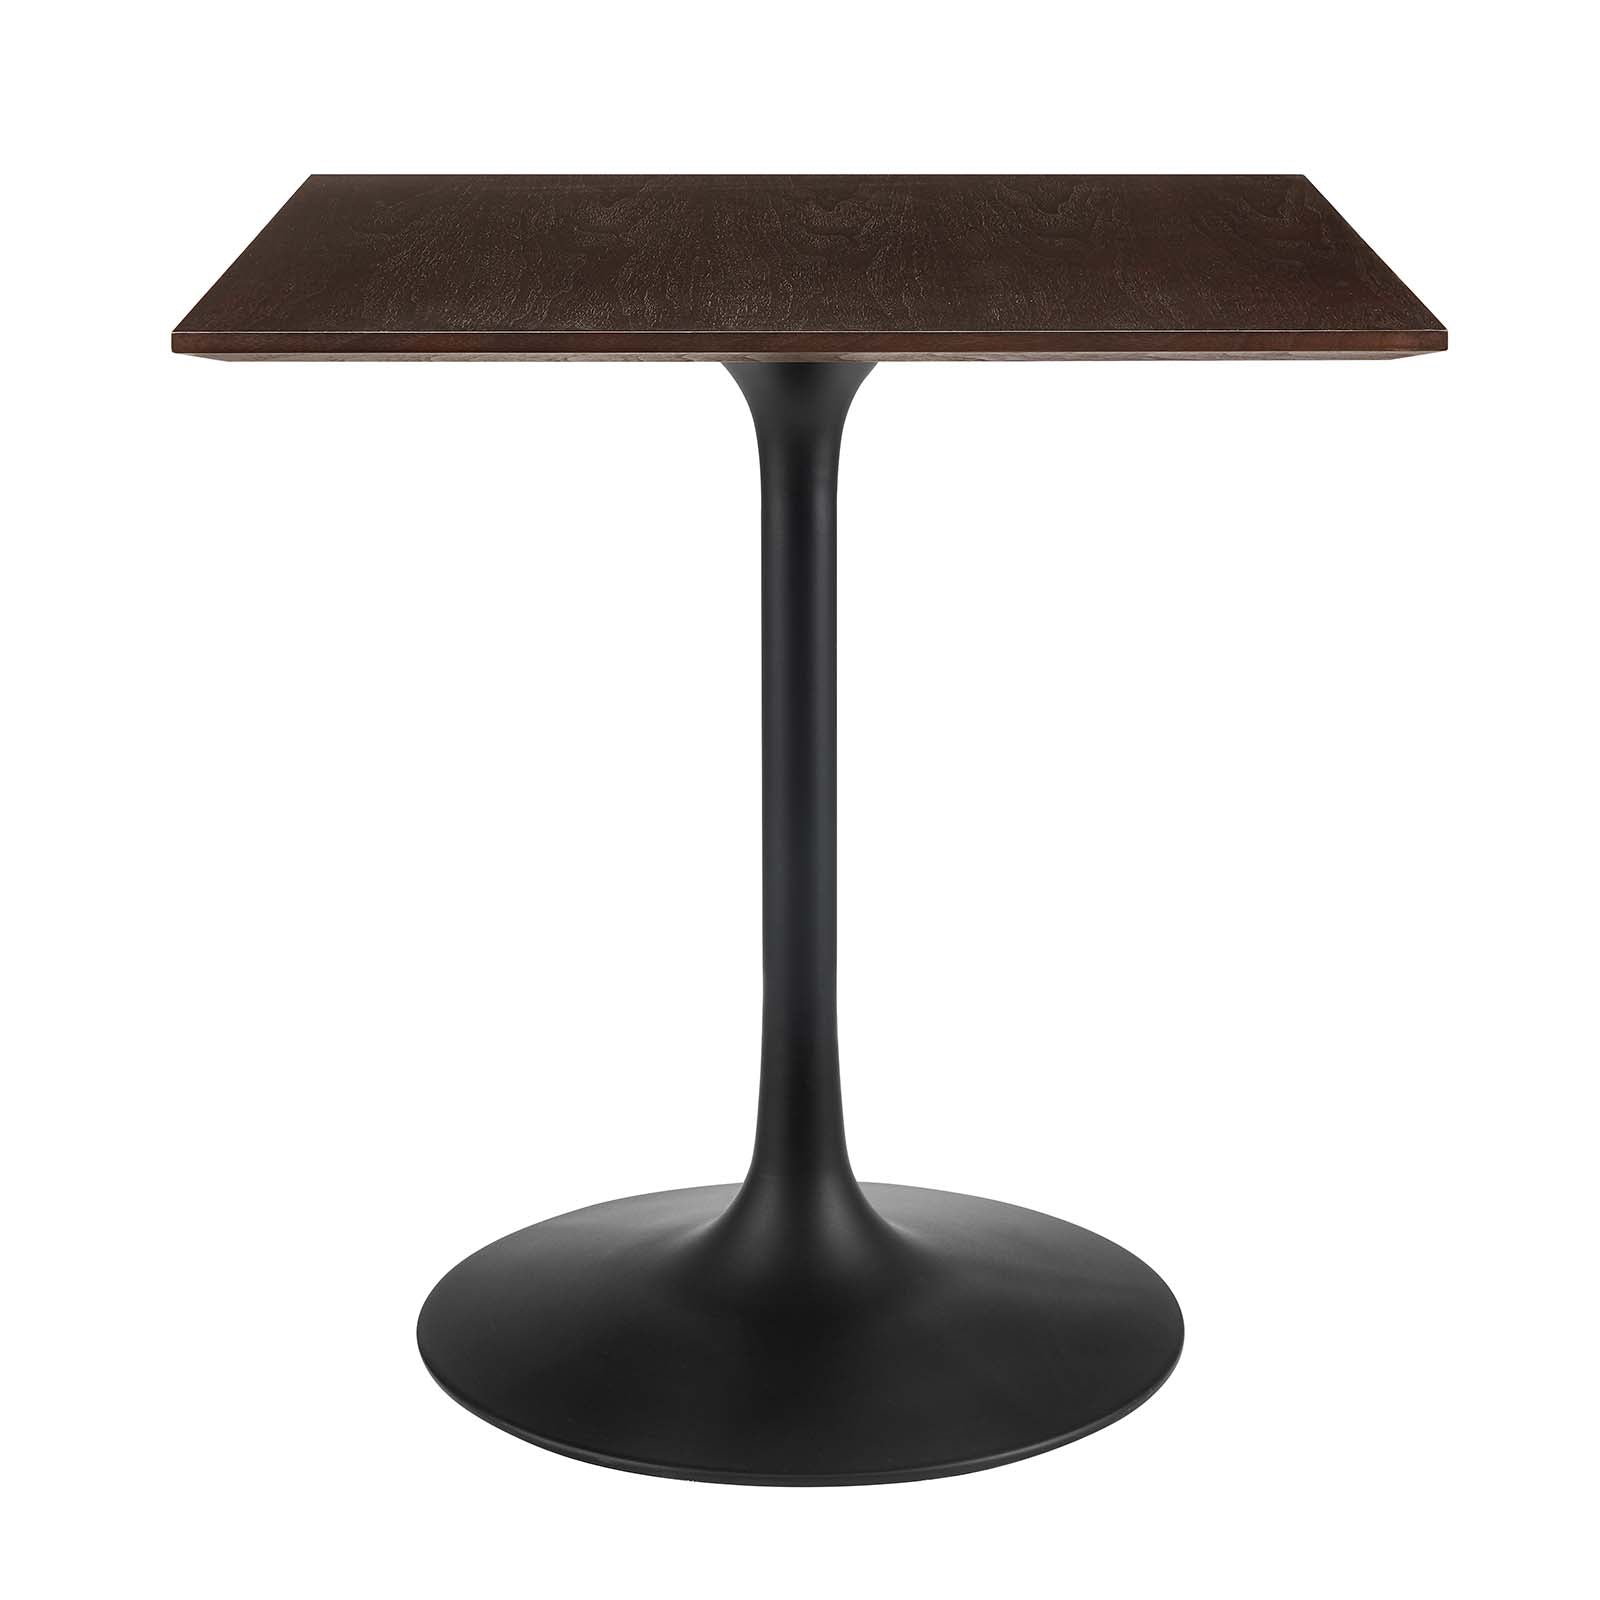 Lippa 28" Wood Square Dining Table